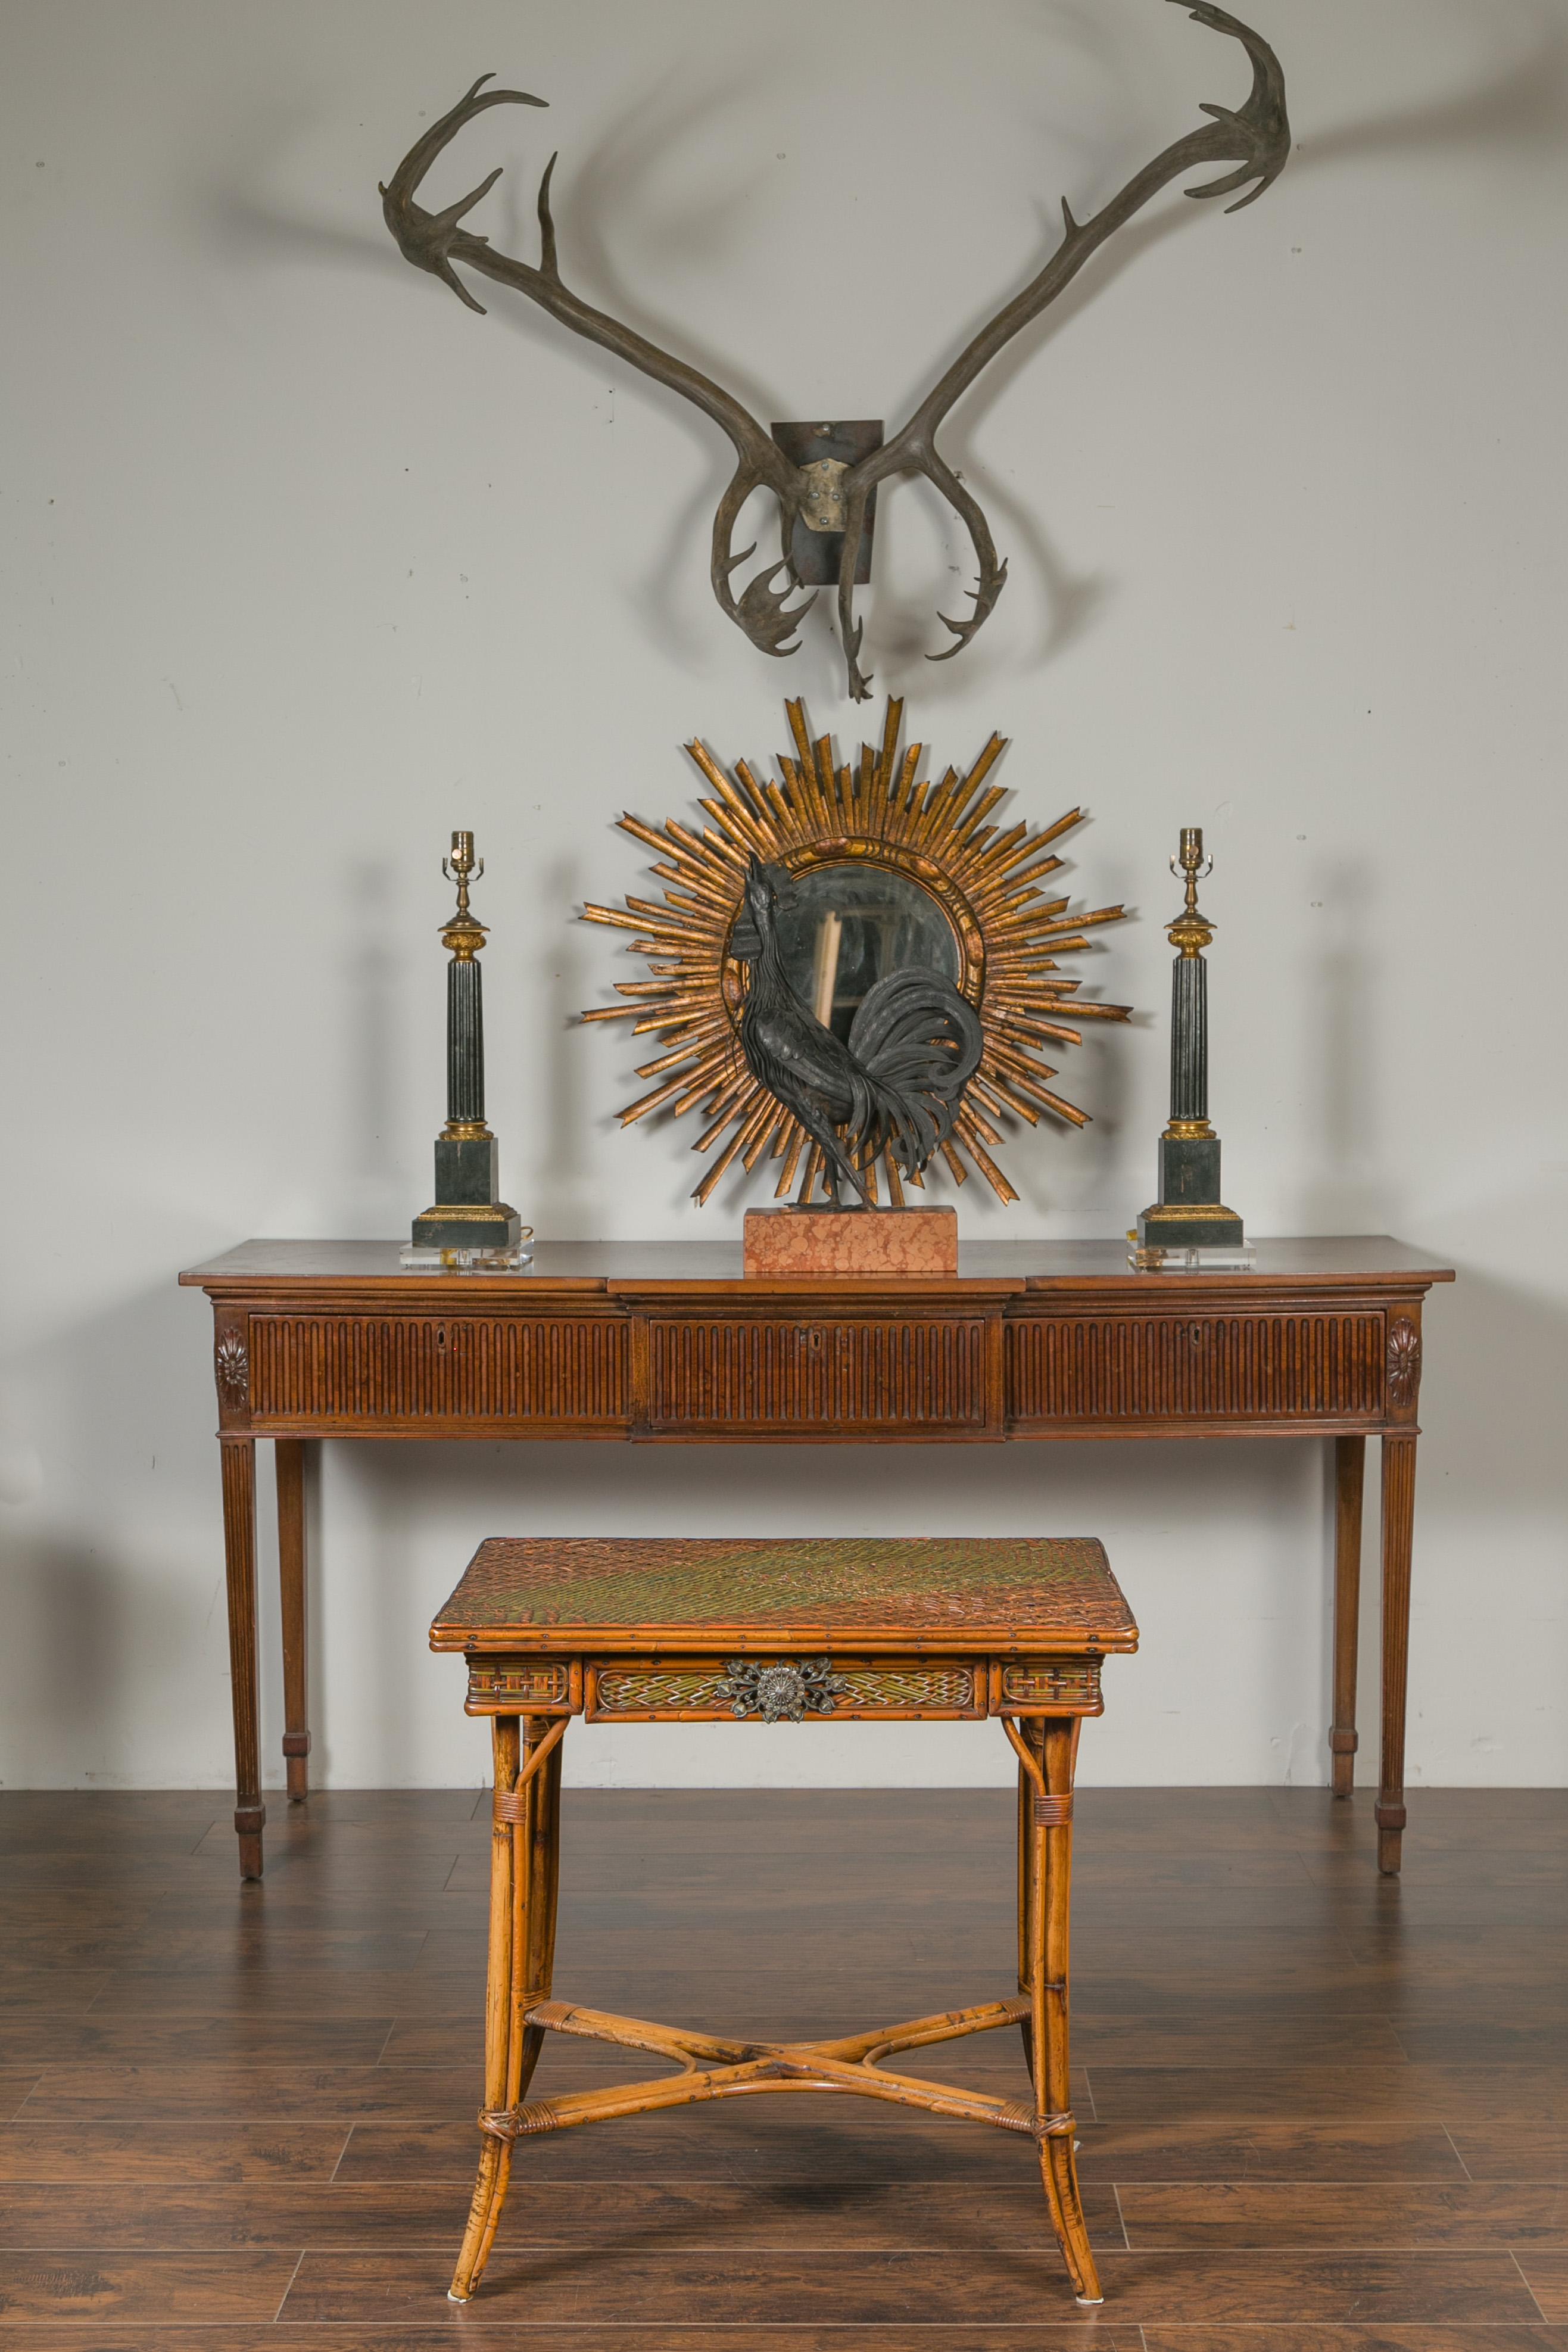 An English bamboo side table from the early 20th century, with rattan top and ornate hardware. Created in England at the turn of the century, this bamboo side table features a two-toned rattan top sitting above a single drawer fitted with exquisite